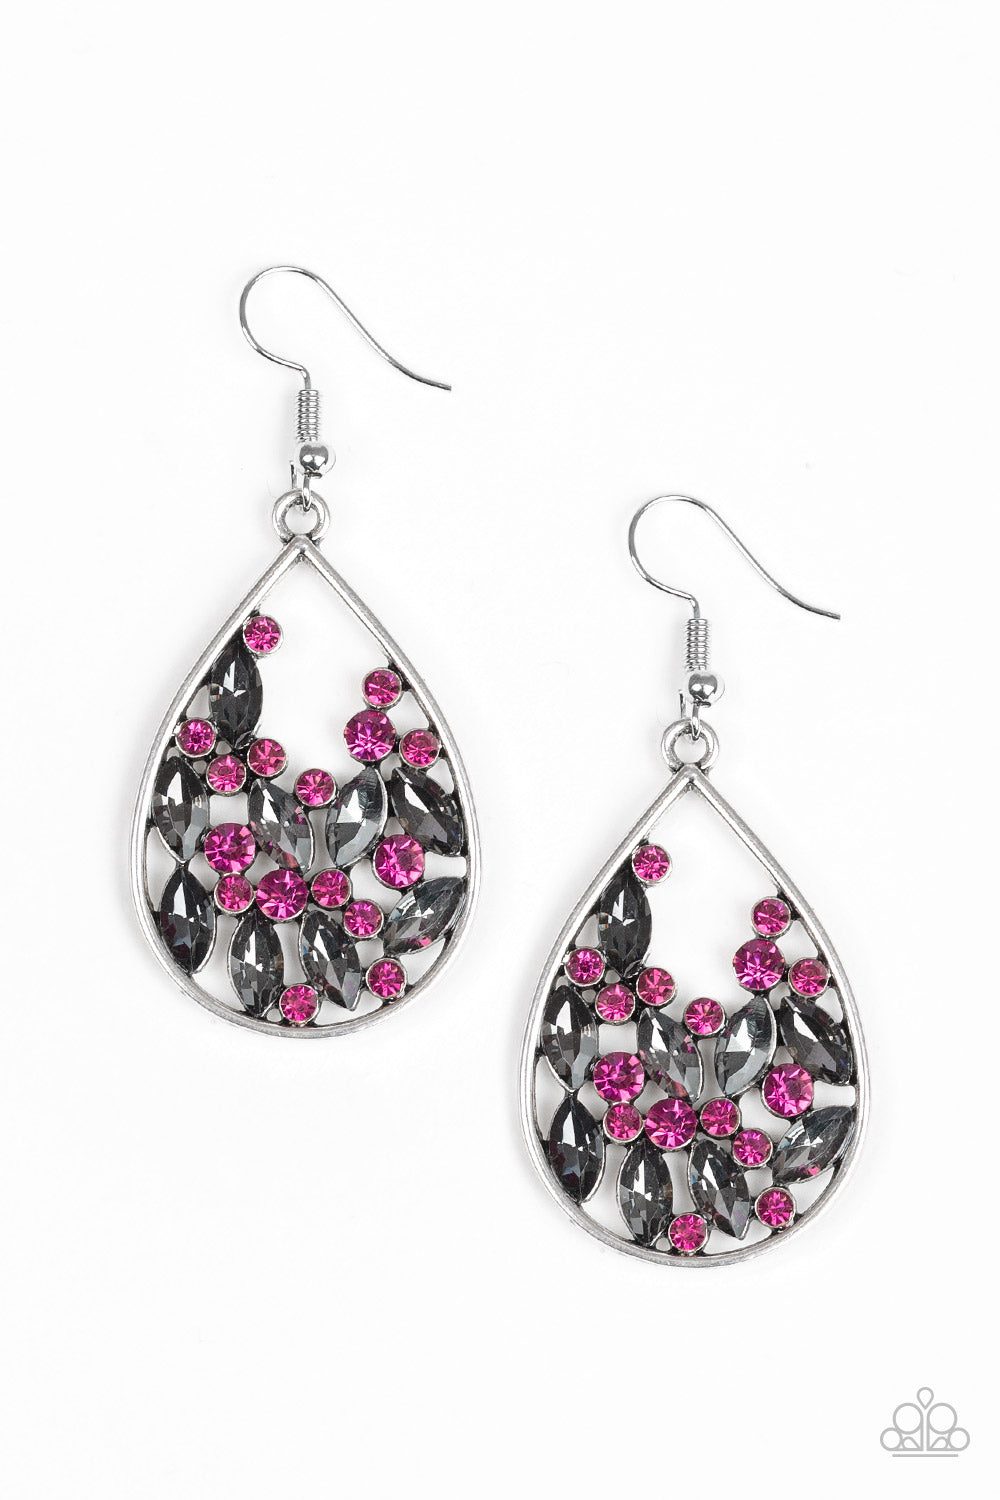 Paparazzi Earrings - Cash or Crystal? - Pink